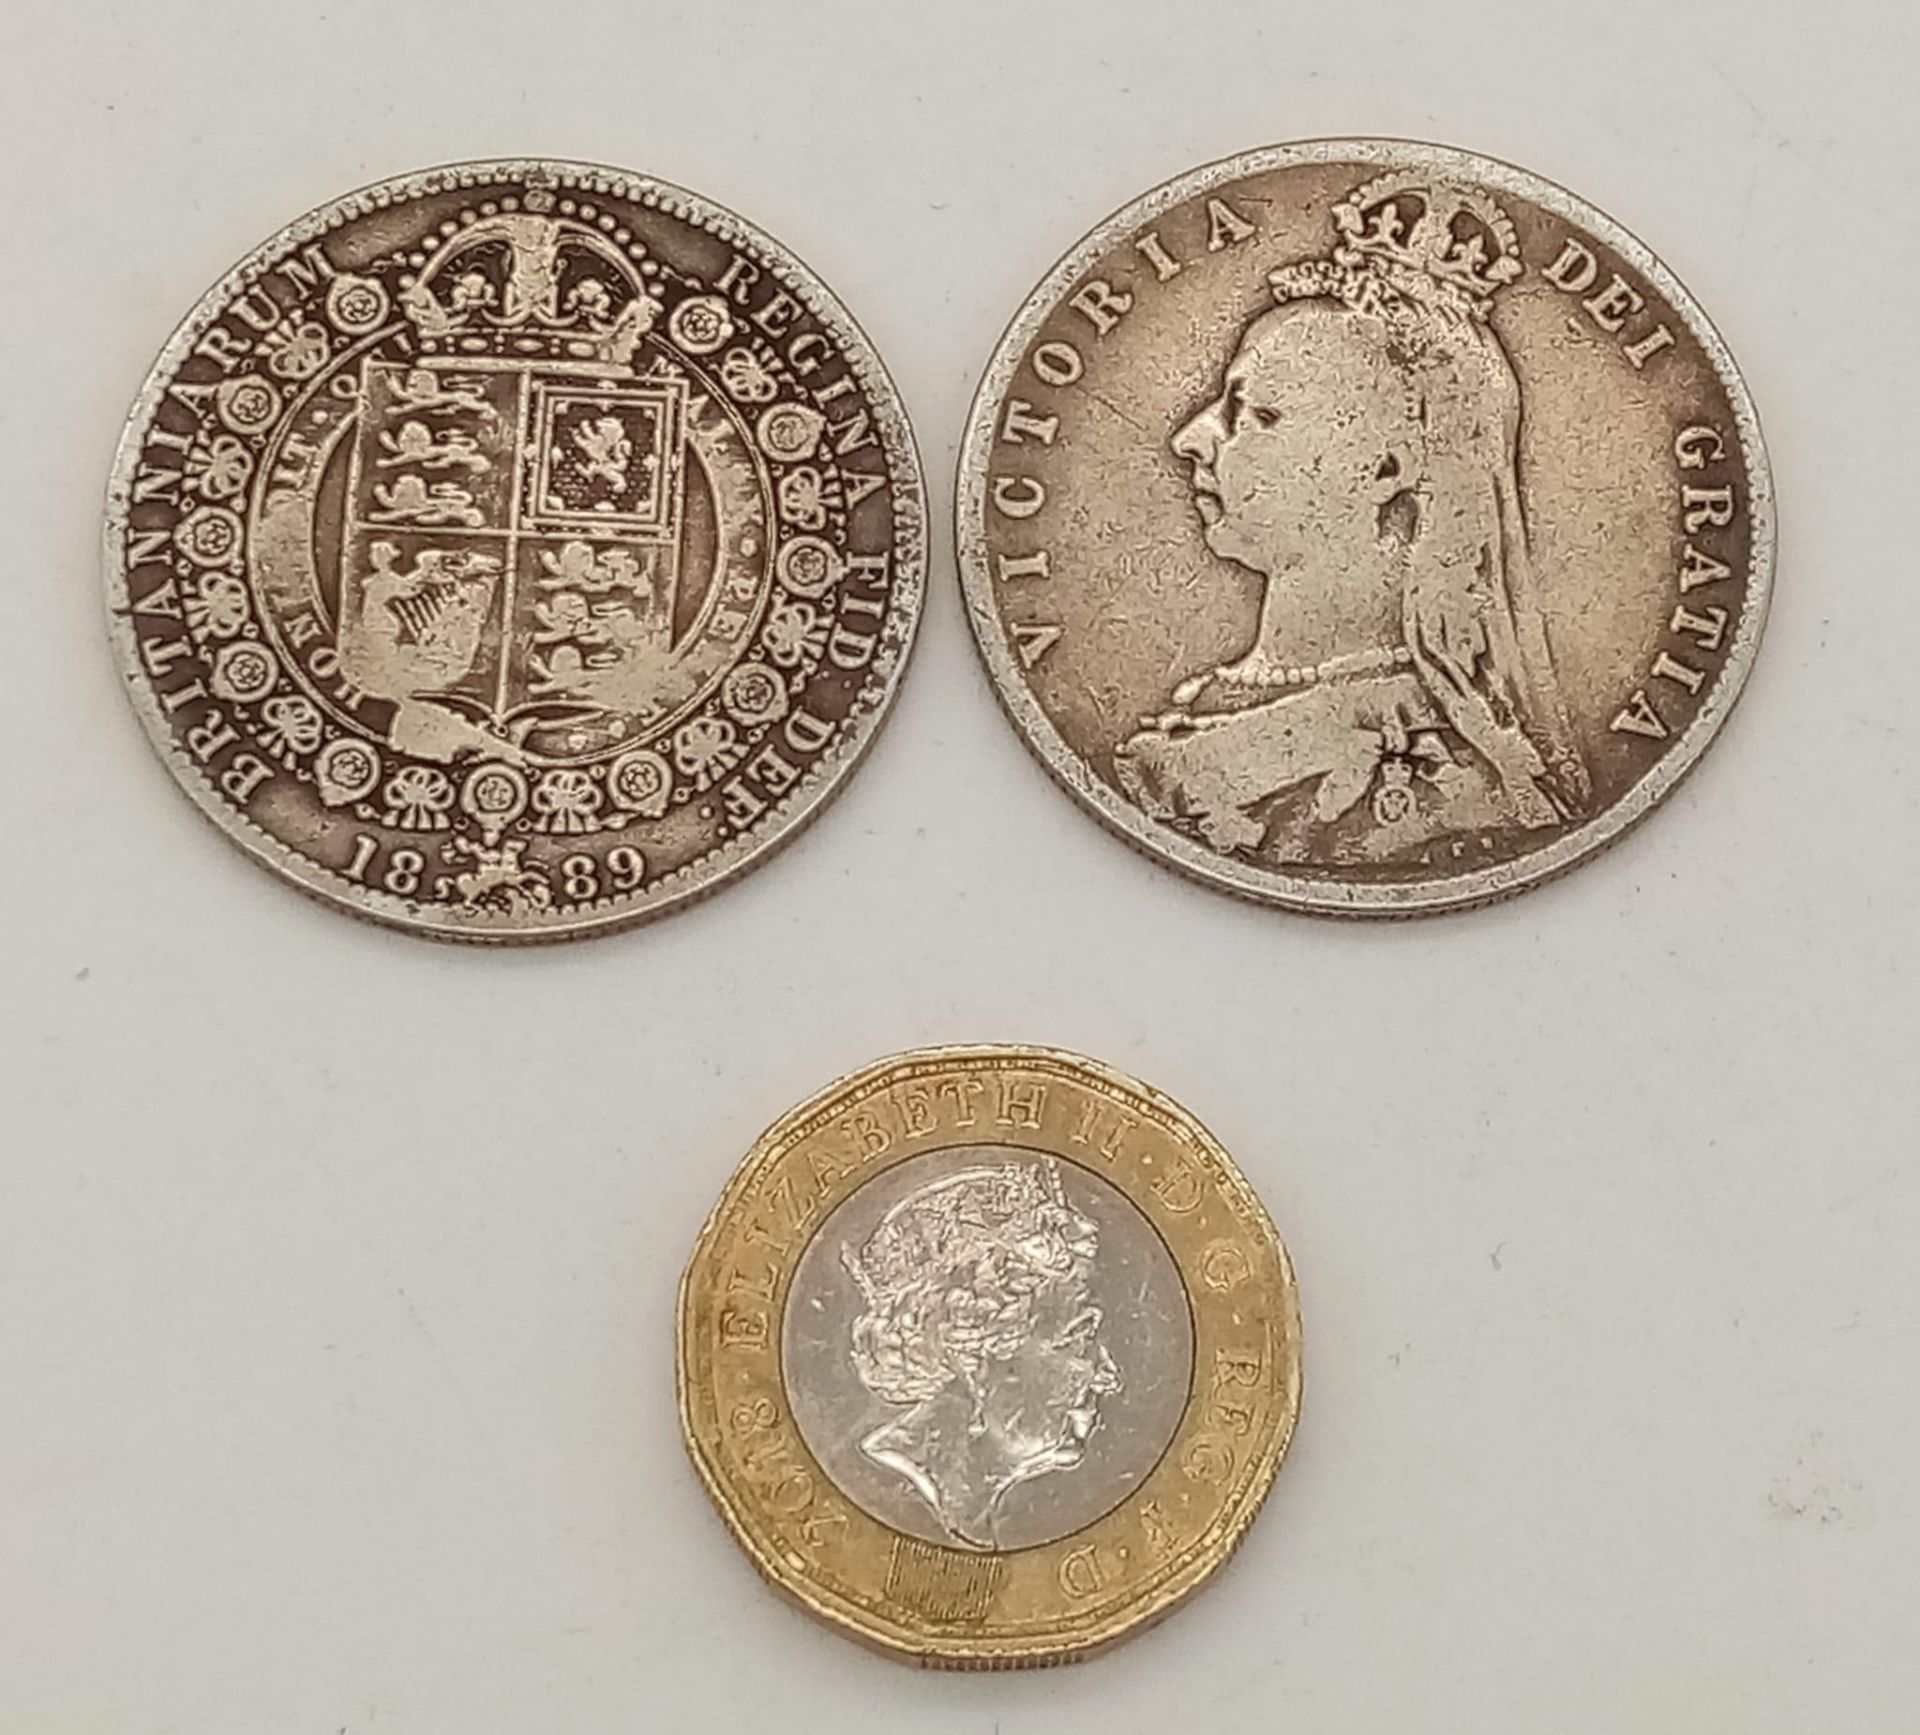 Two Queen Victoria Silver Half Crown Coins Dated 1899 & 1890. Extremely Fine & Fine Condition ( - Image 3 of 3